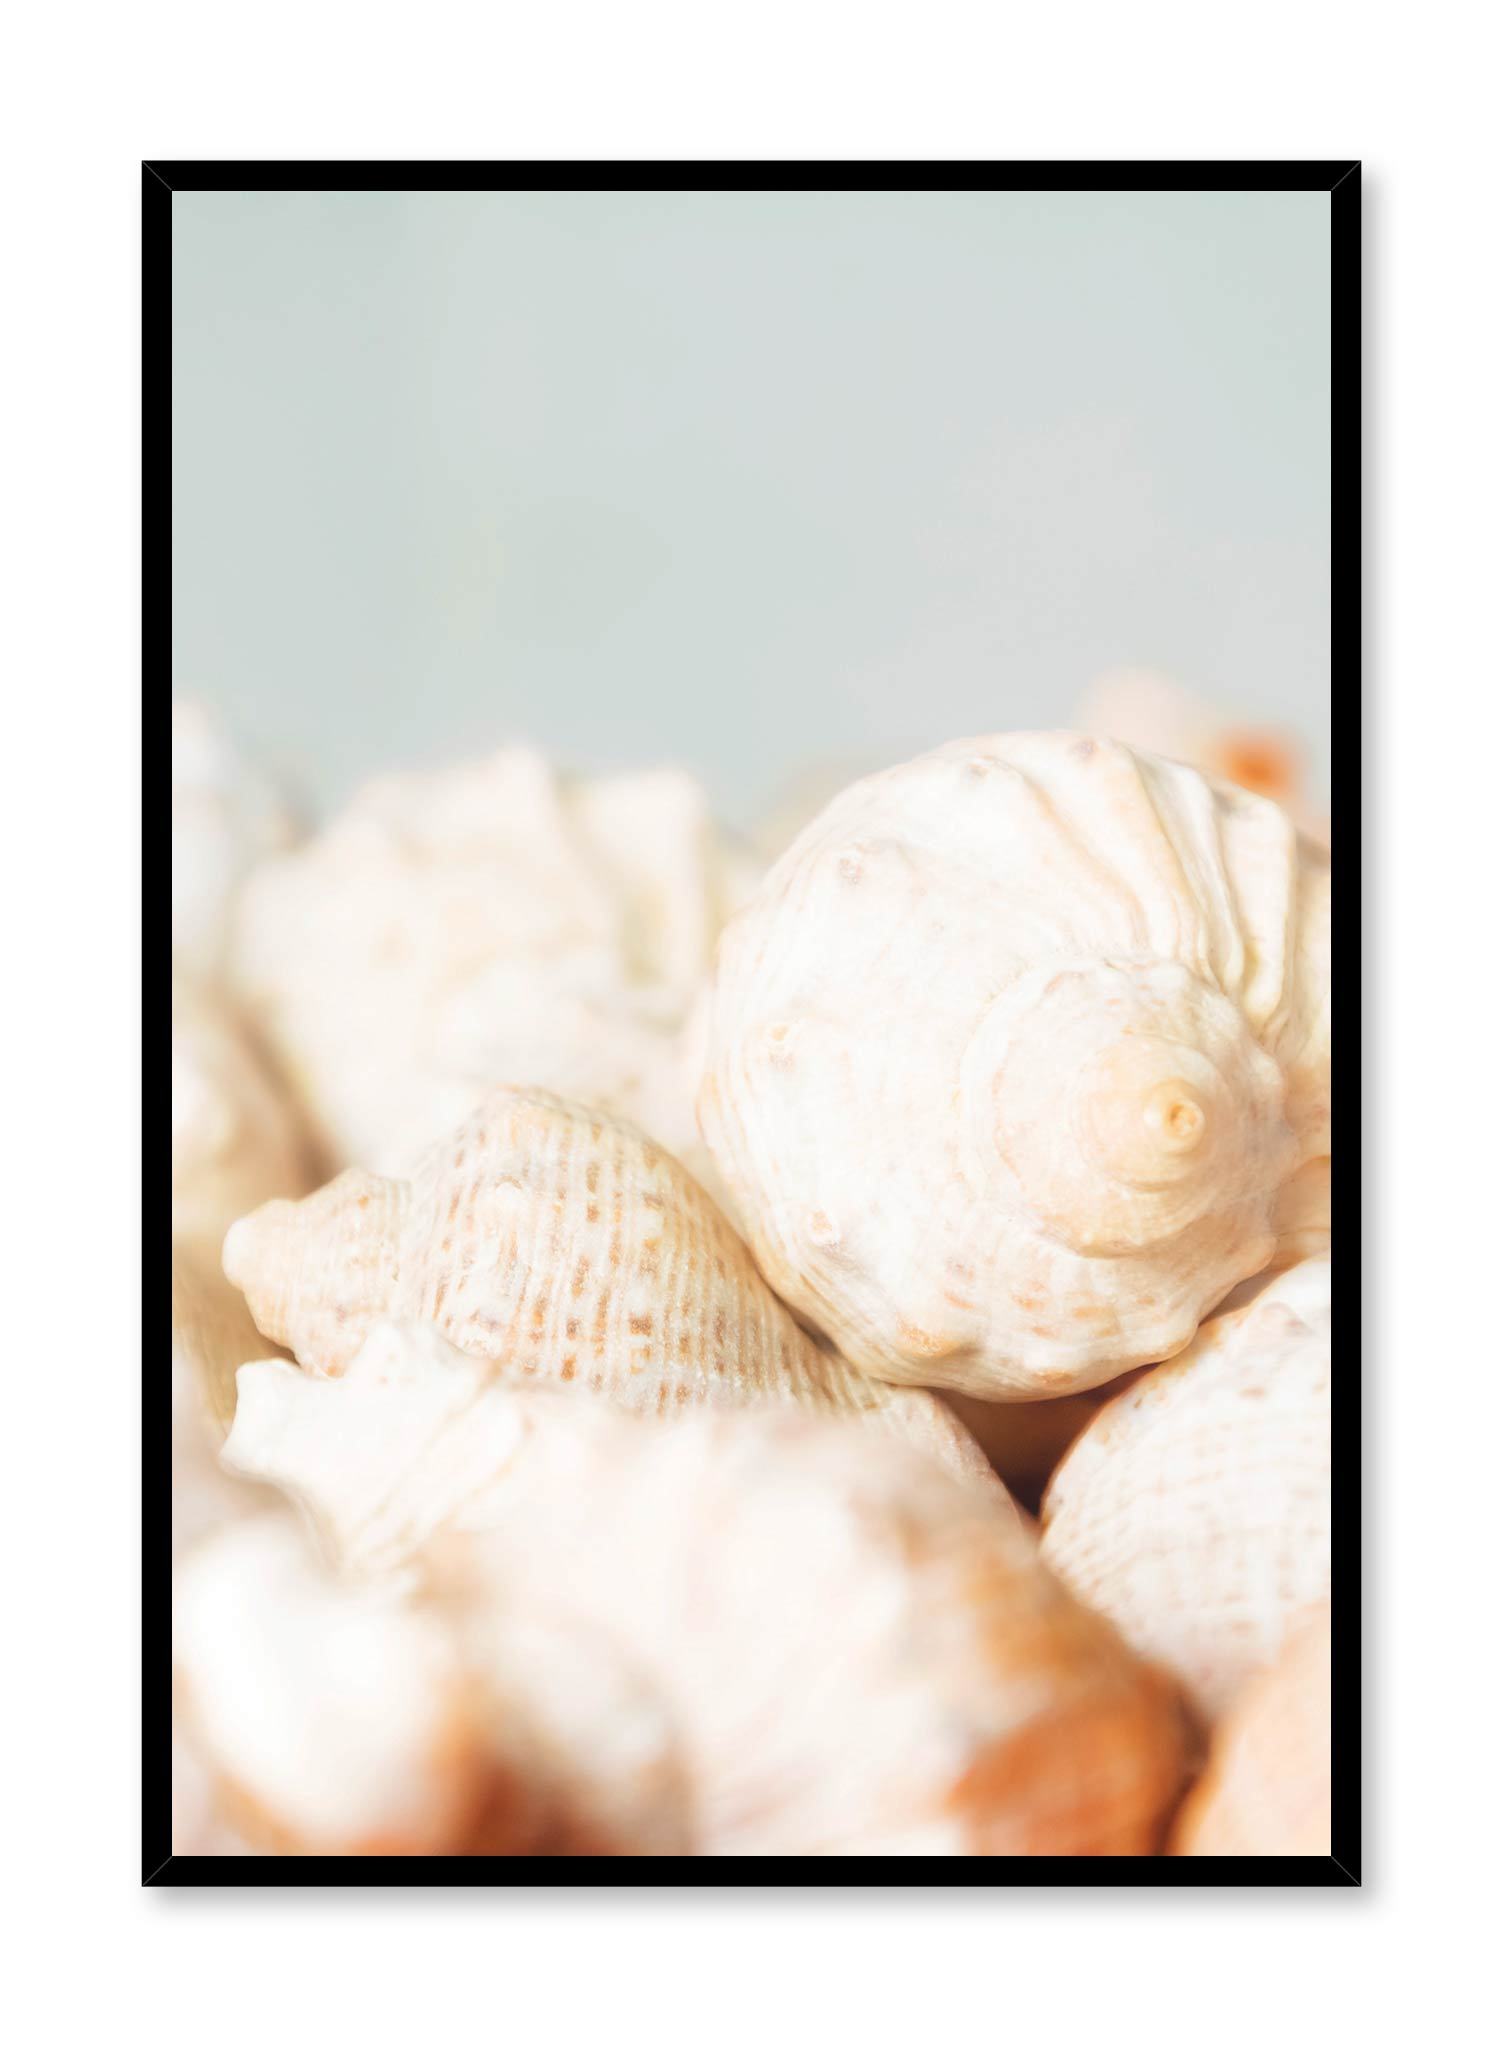 Conch is a minimalist photography of a close-up shot of many conches showing their detailed exterior by Opposite Wall.